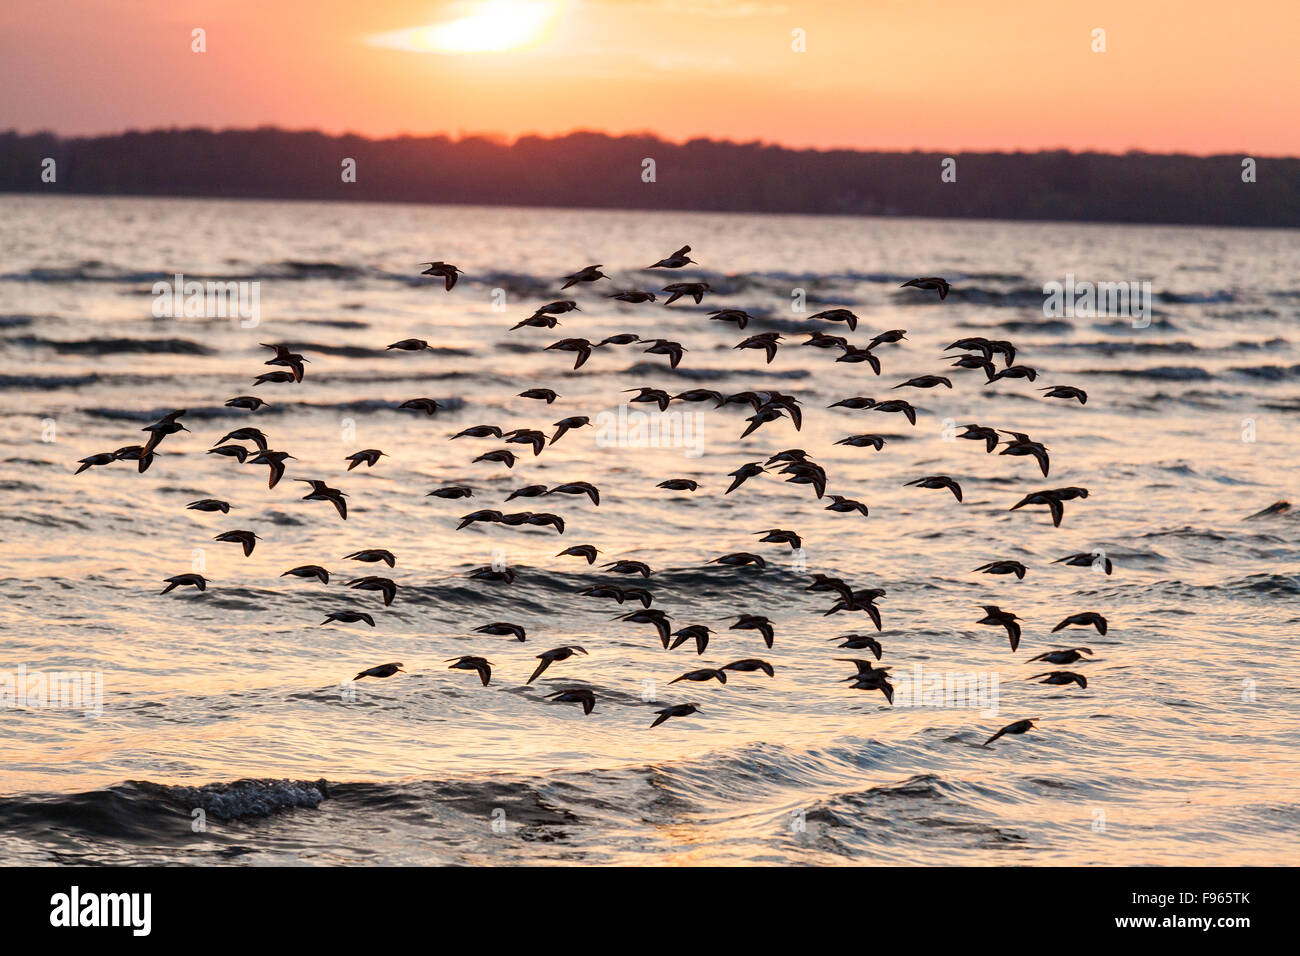 Migrating shorebirds silhouetted against the setting sun in Sandbanks Provincial Park, Ontario, Canada Stock Photo